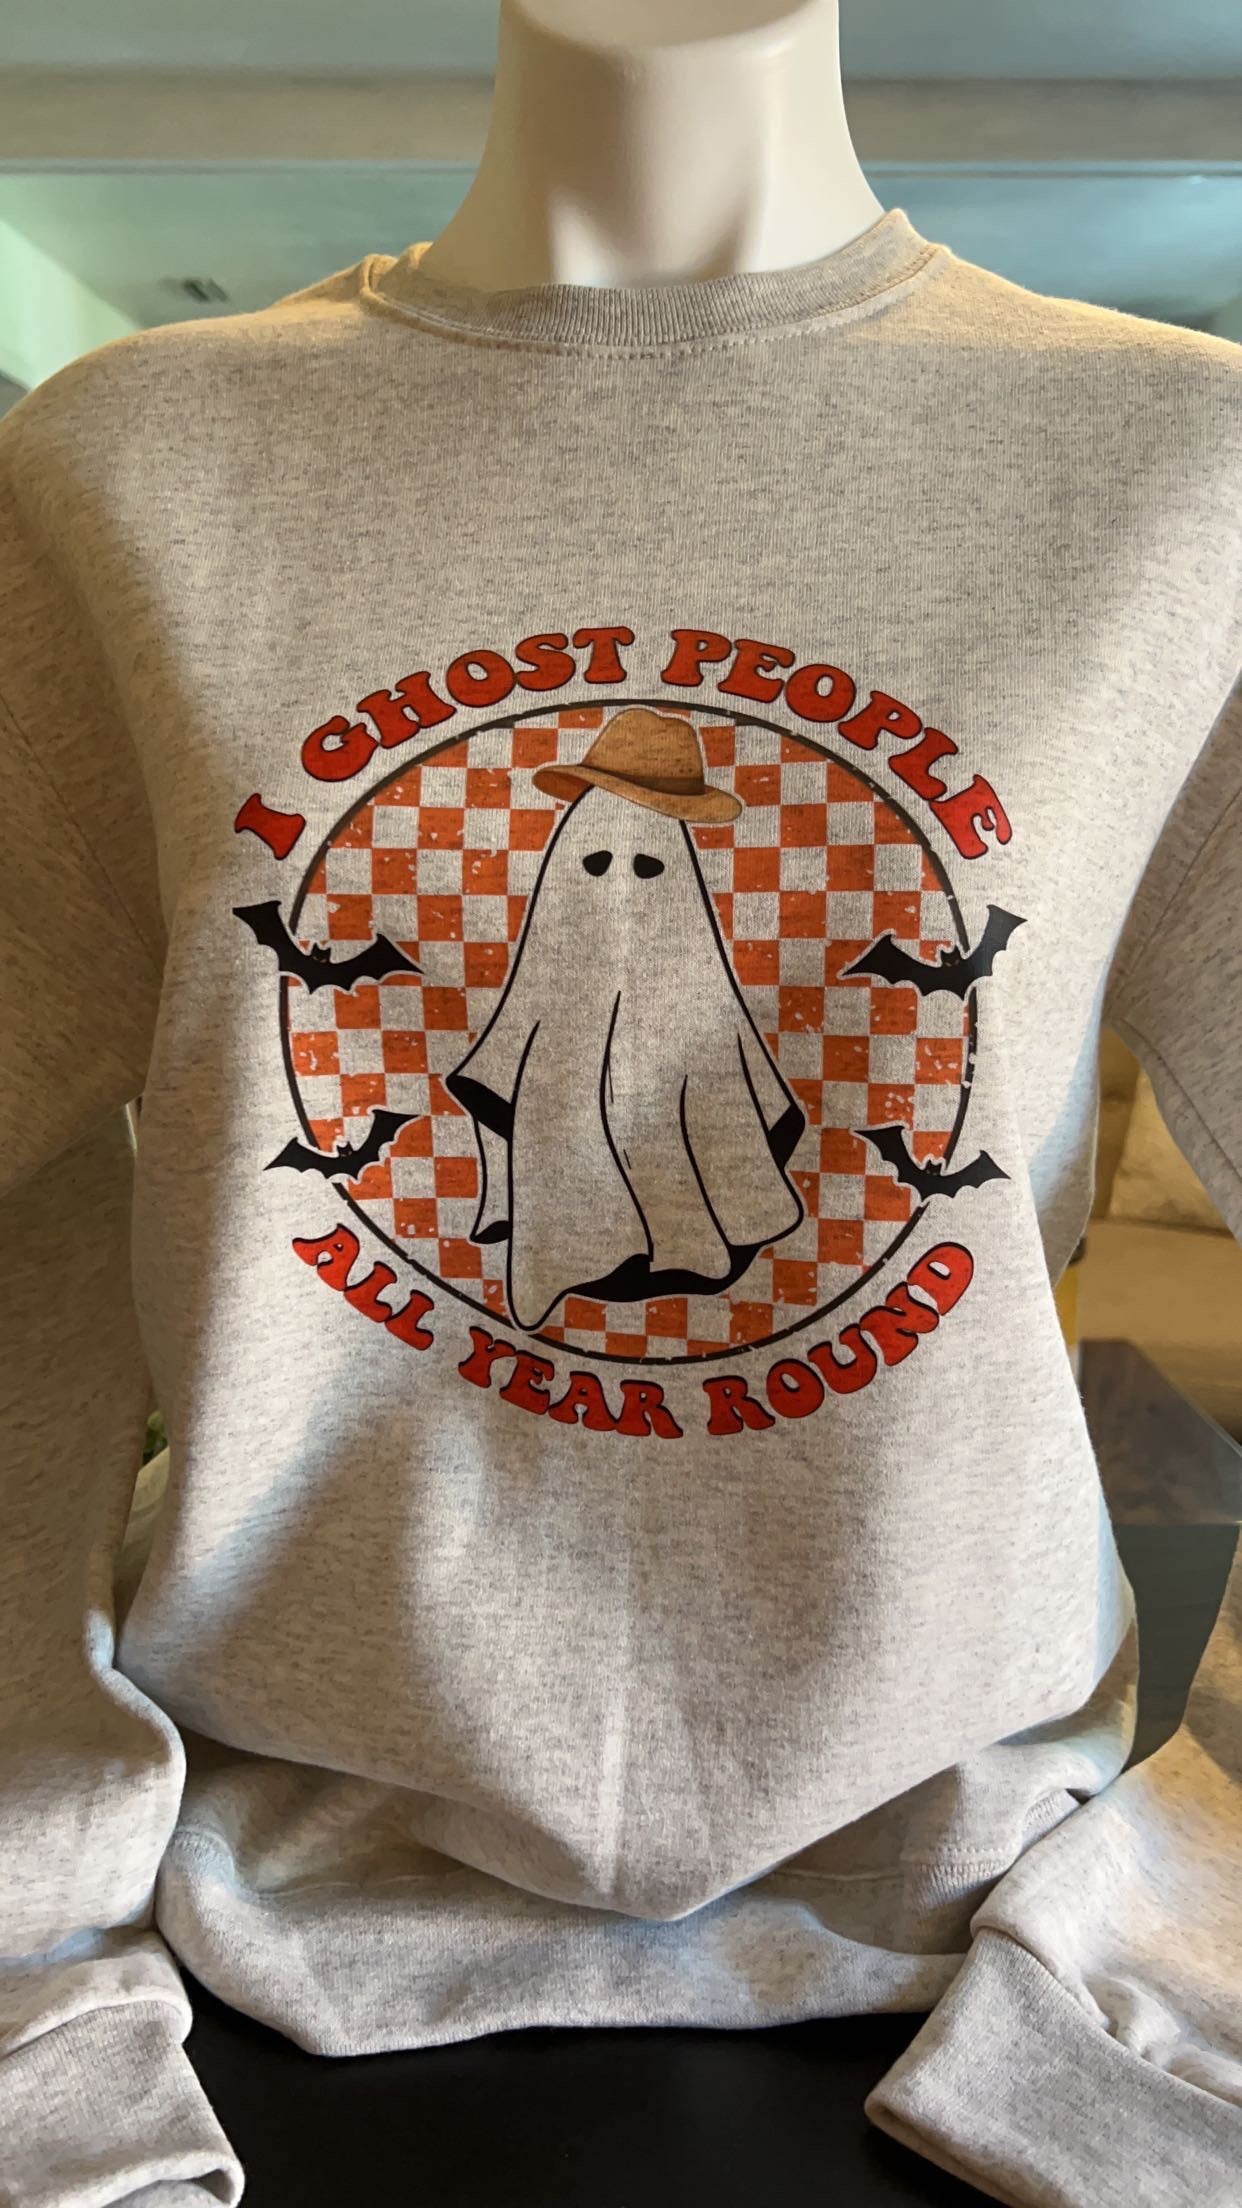 I Ghost People All Year Round Crewneck Sweater or Pullover Hoodie